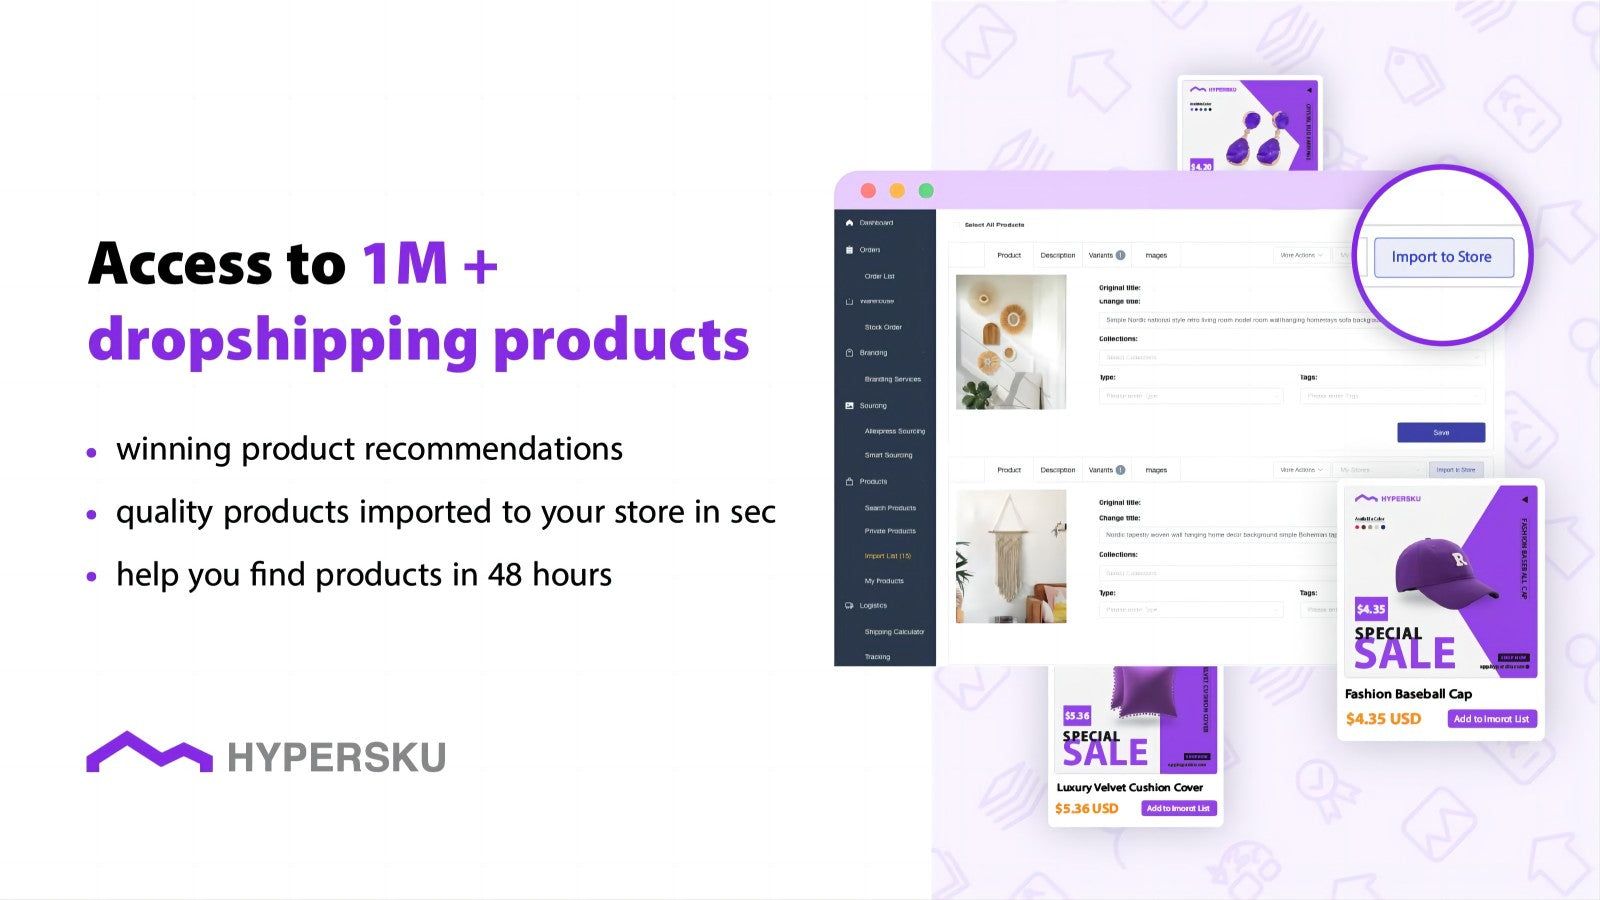 source products in 48 hours-HyperSKU PRO Dropshipping